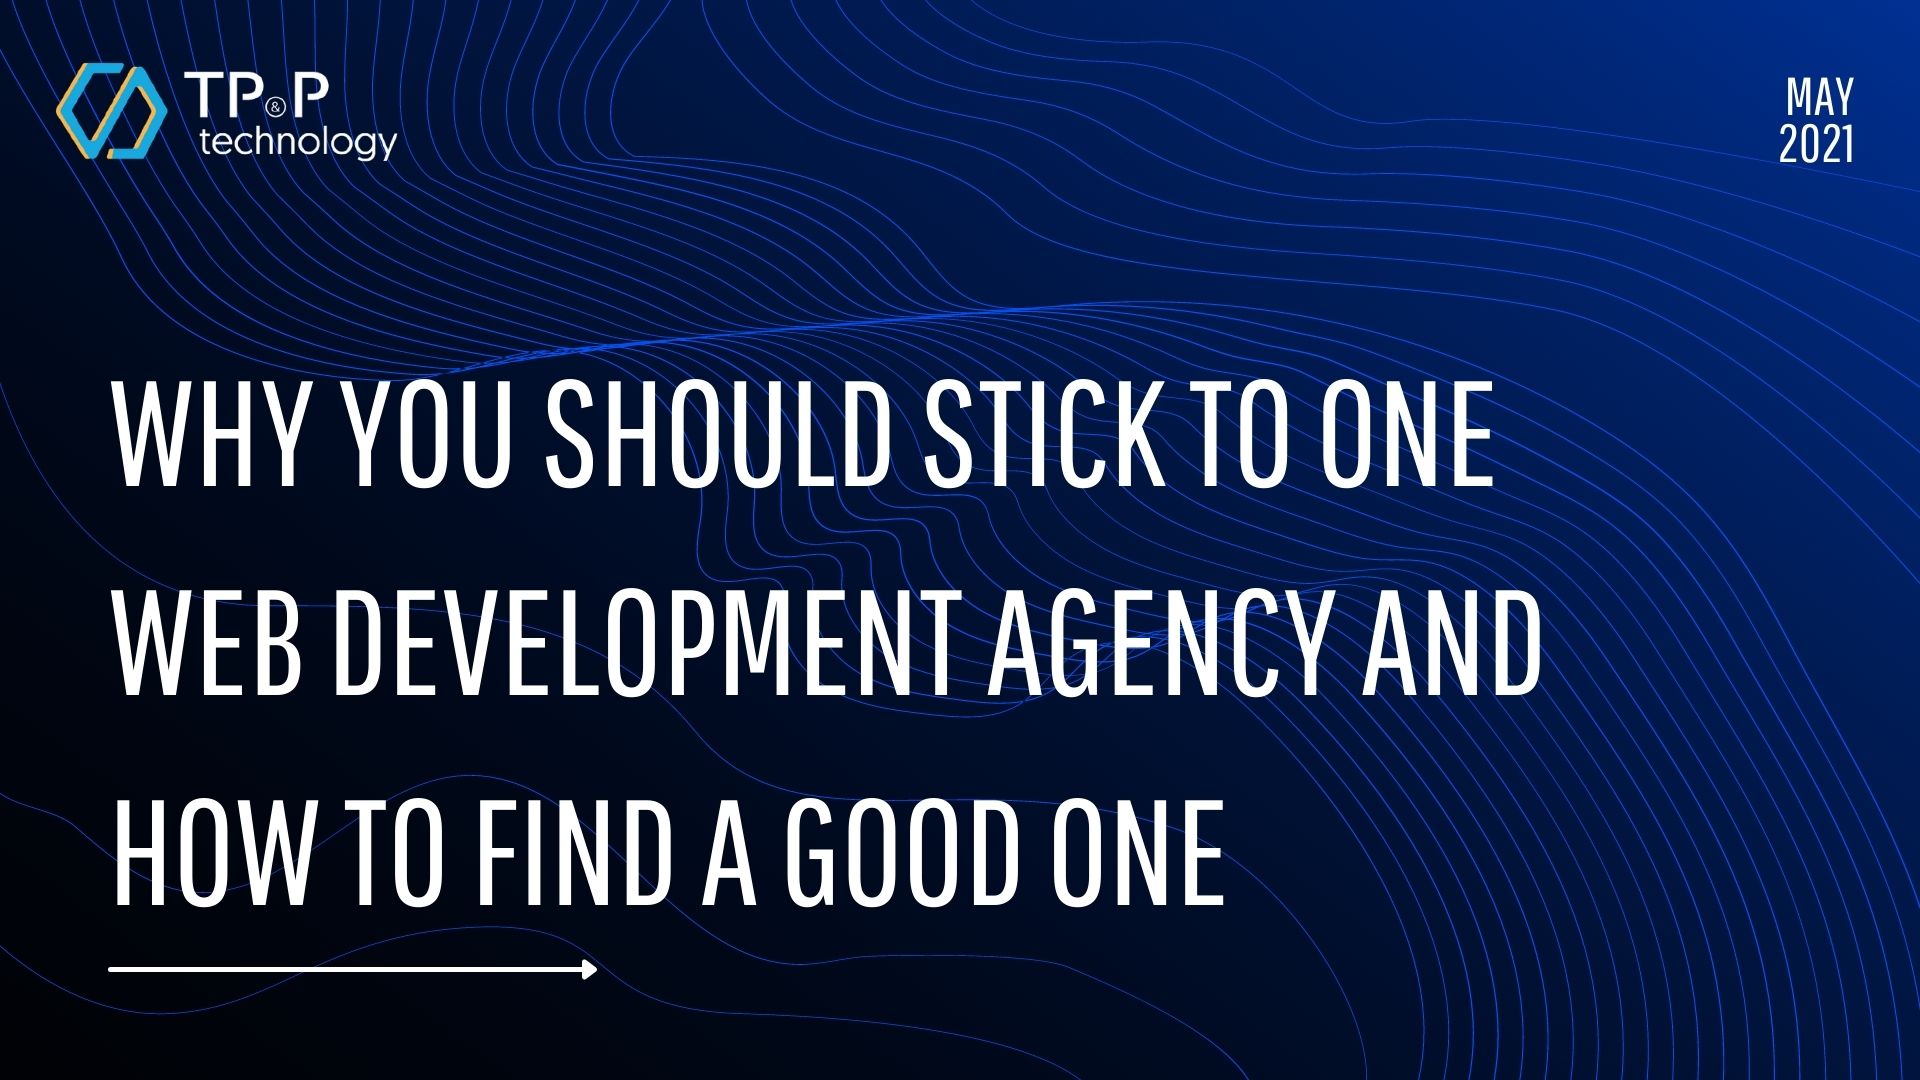 Why You Should Stick To One Web Development Agency And How To Find A Good One